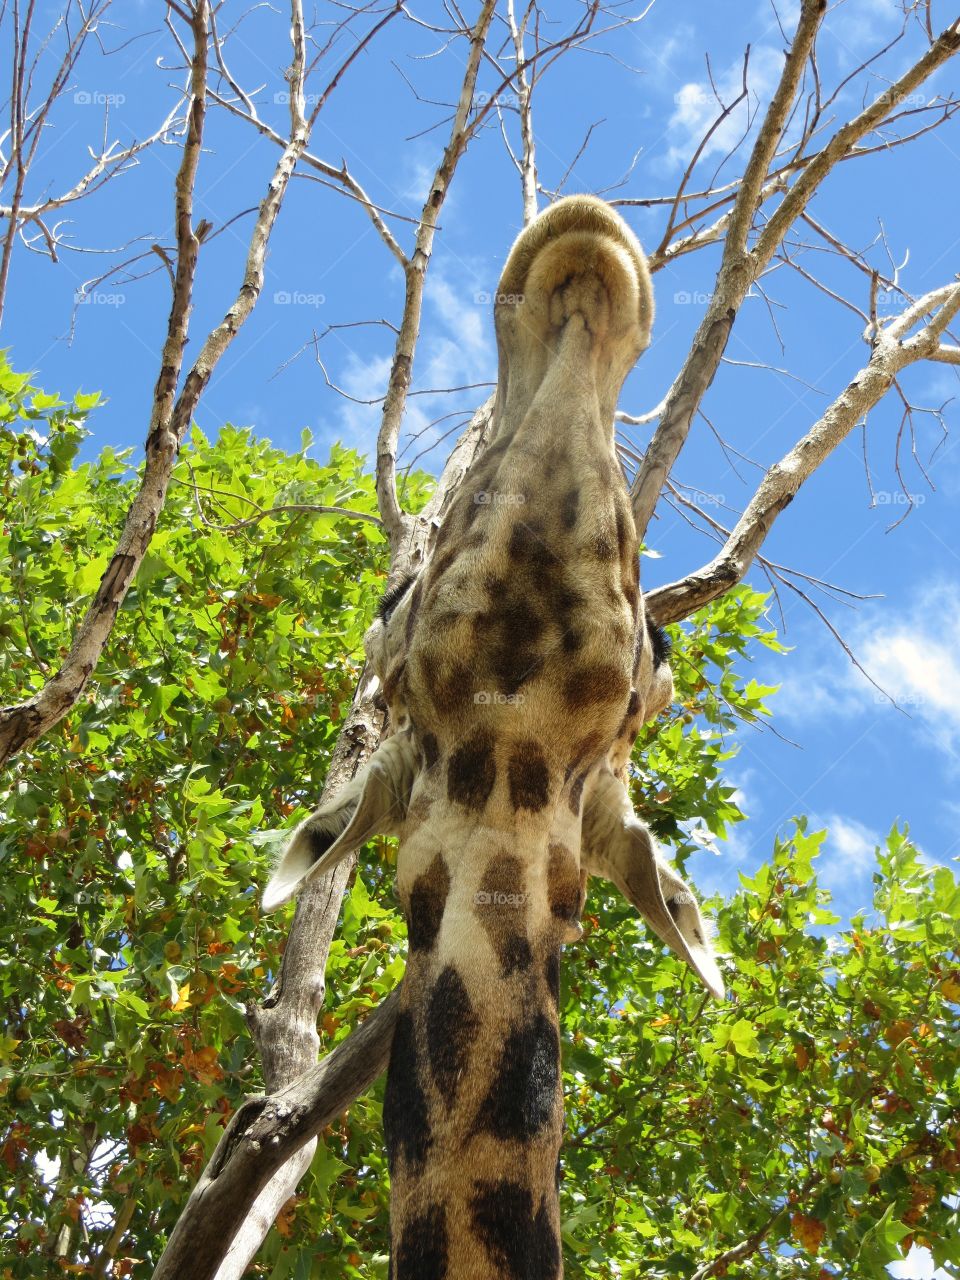 Gambit the giraffe looking up up into the sky 